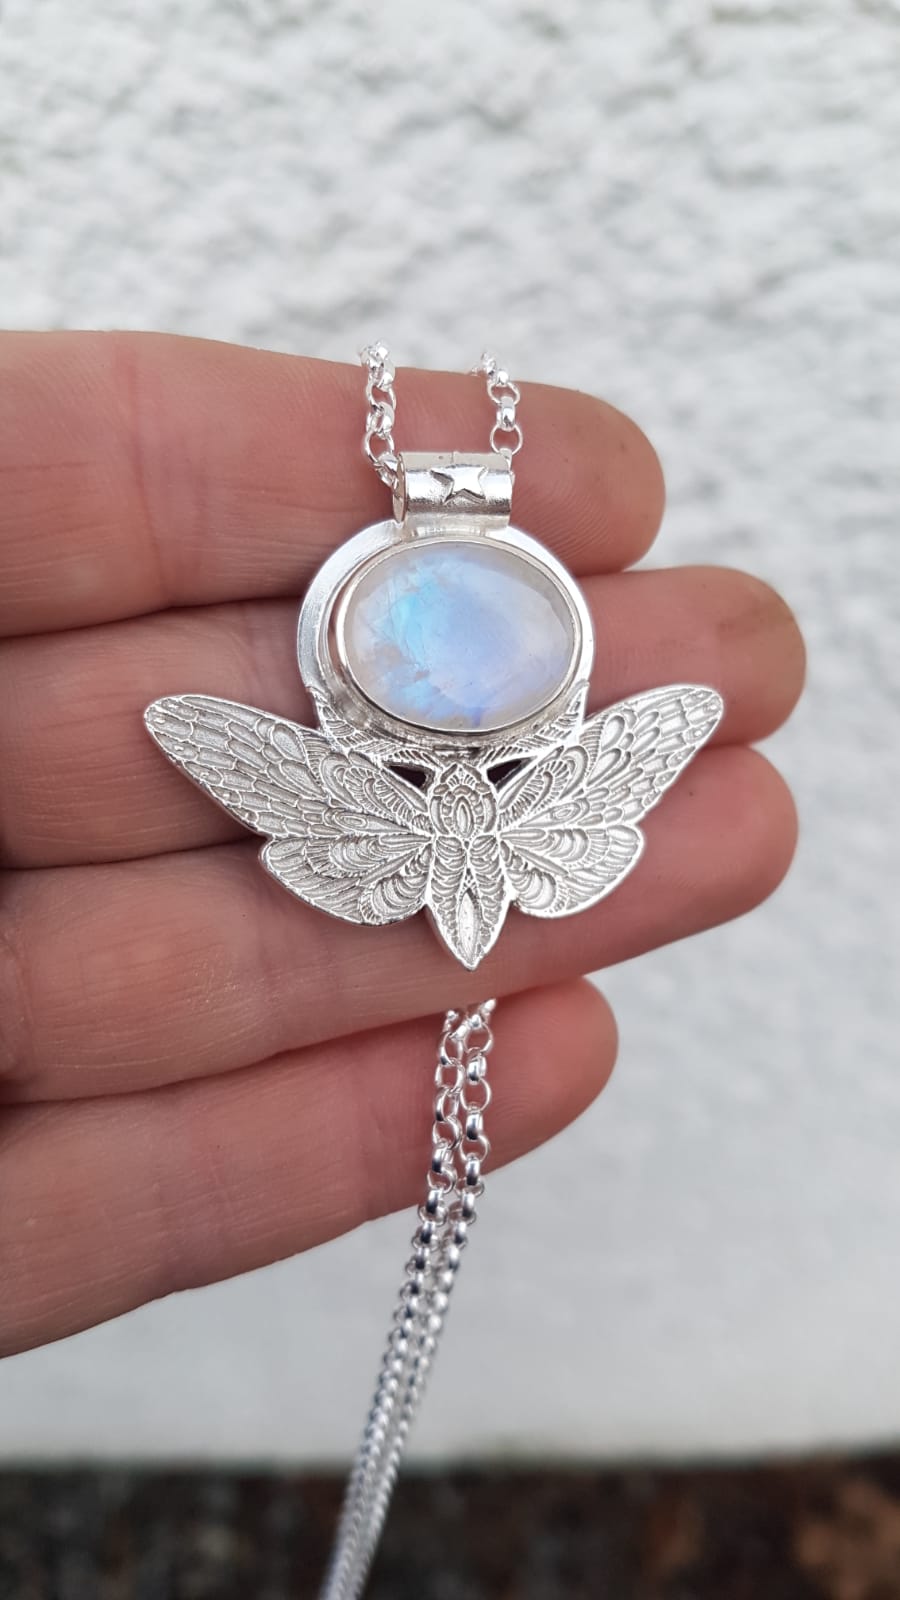 Moth and Moonstone Necklace.